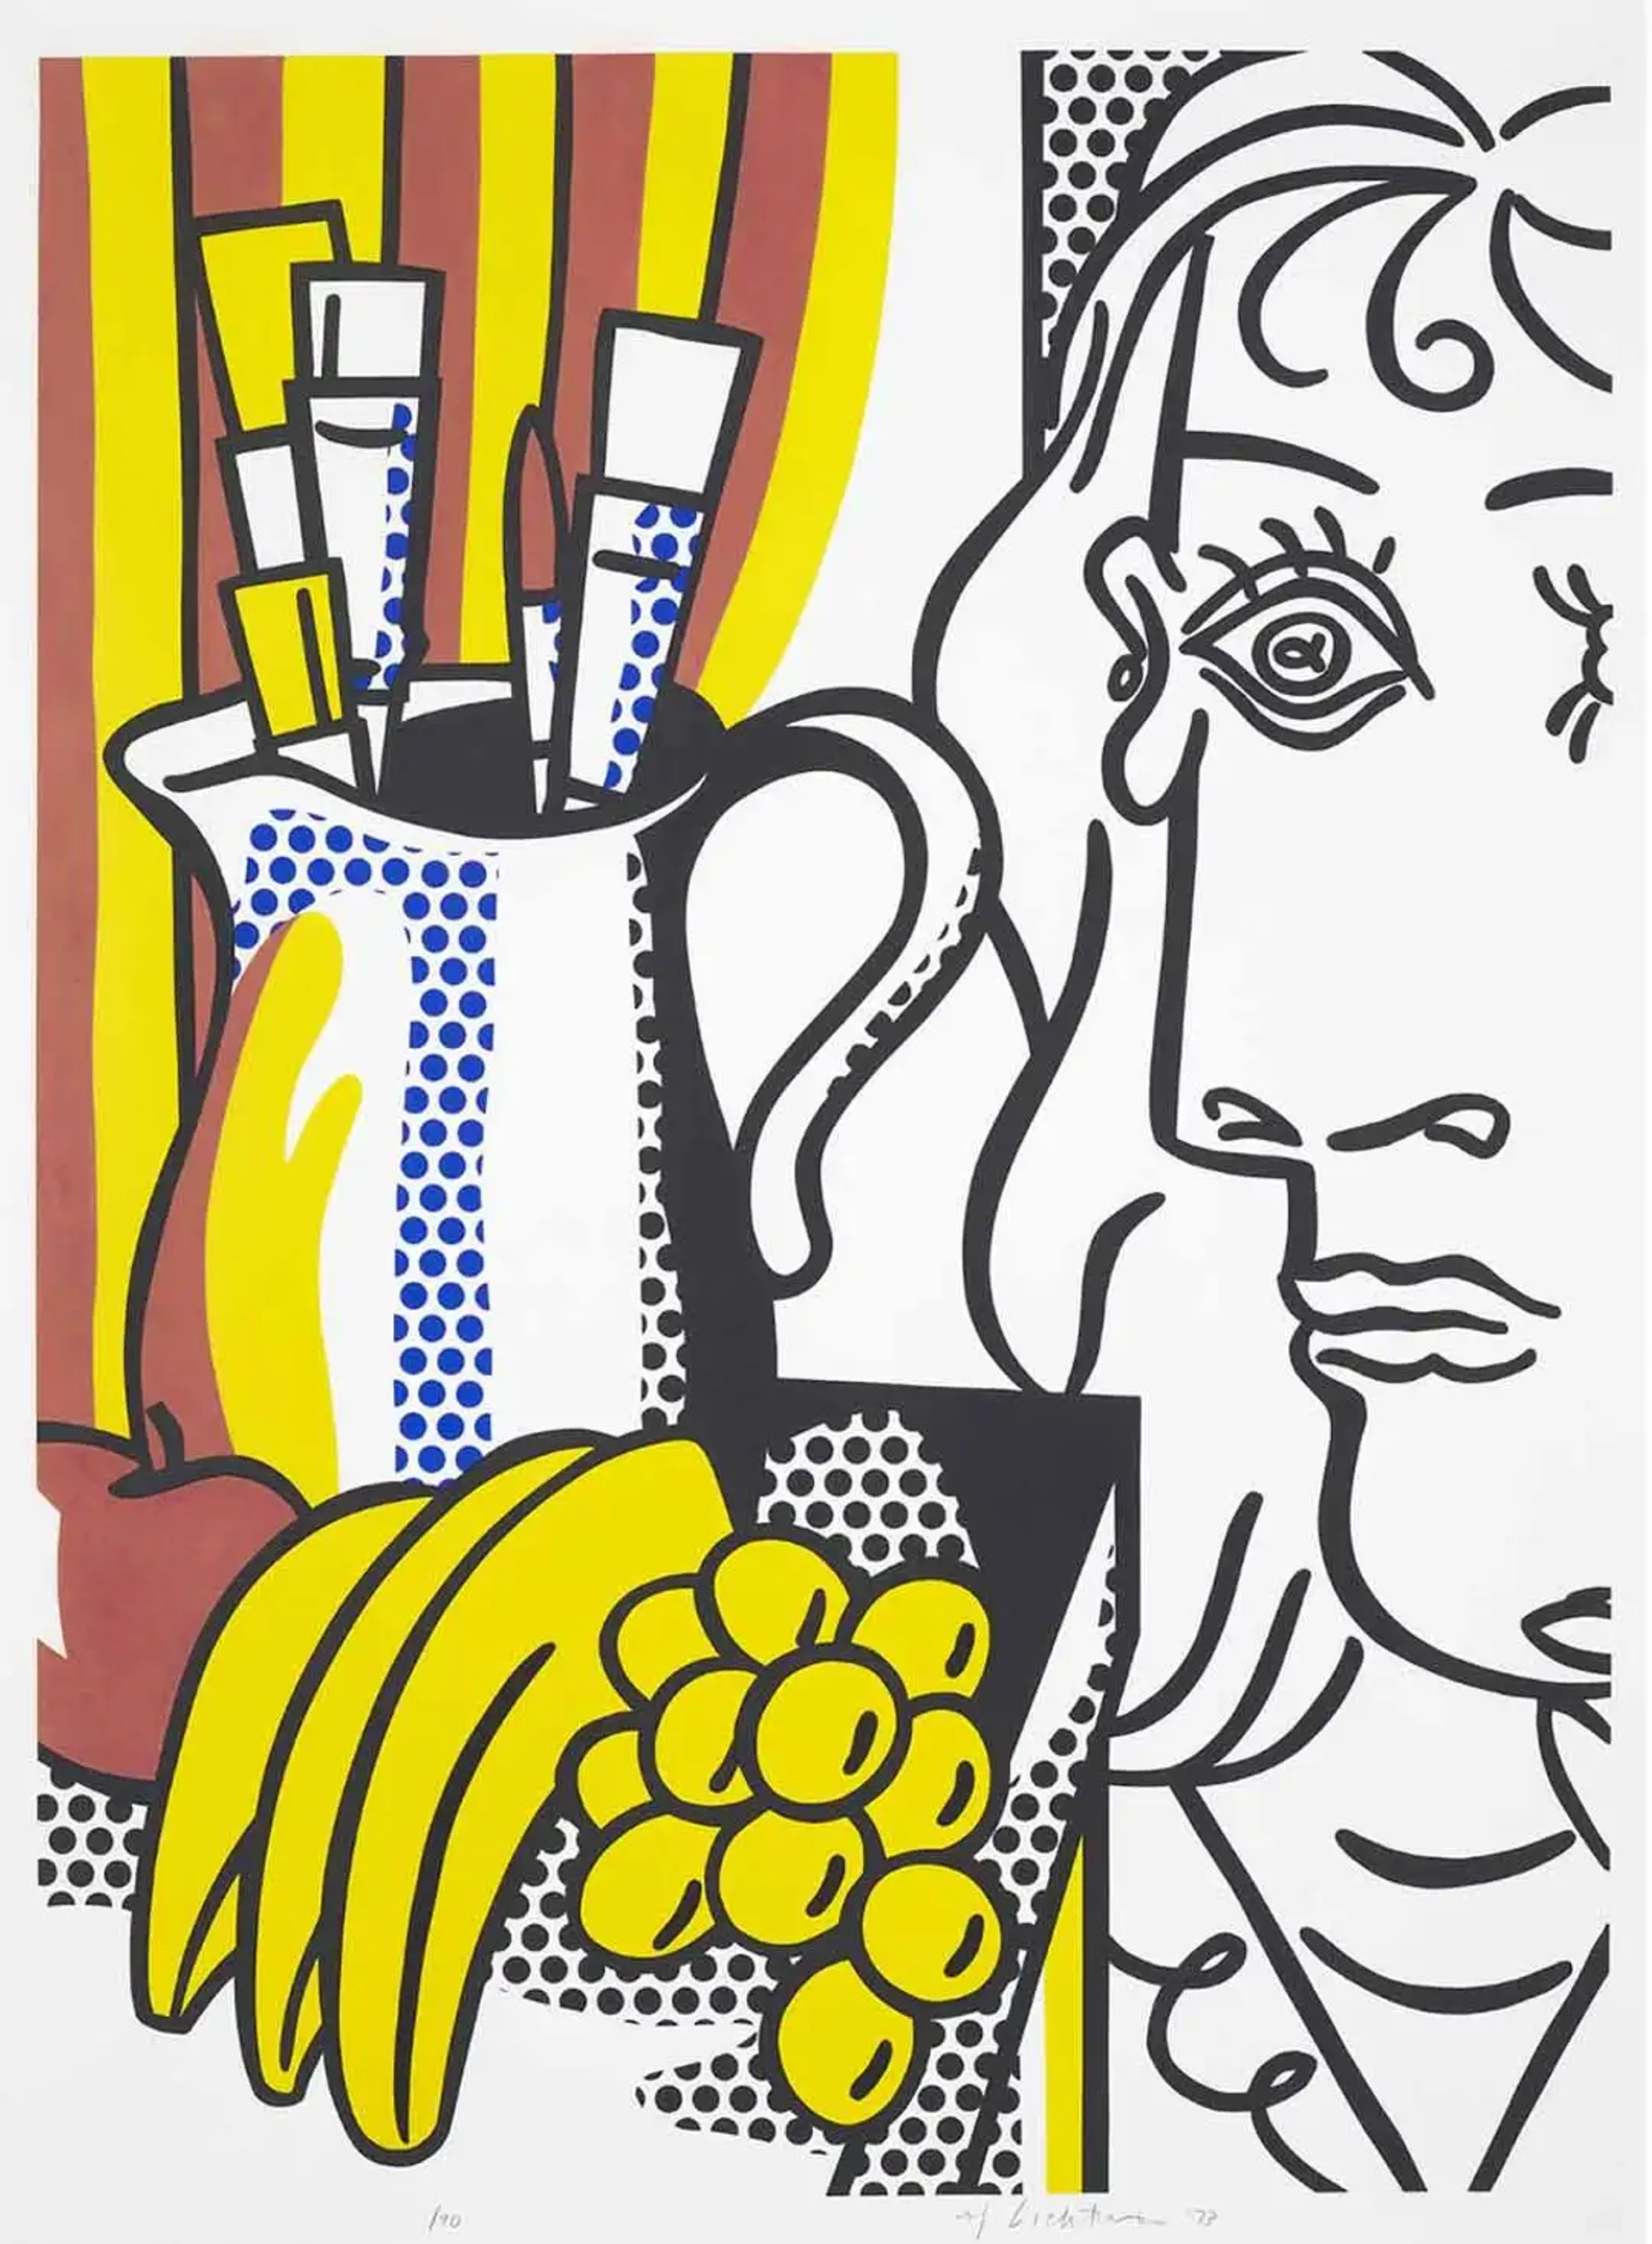 Lichtenstein supplies the print with his commercial style Ben-Day dots and primary blocks of colour, in order to deliver a vivid cartoon impression. Still Life with Picasso presents a varied and unpolished composition. Mimicking the simplistic drawing style of Picasso, a woman figure peers into the frame from the right, captured in thick black curving lines set against a white backdrop. Selected pieces of fruit sit in the bottom left corner of the canvas. A jug holding paint brushes is situated towards the upper left margin, adorned by black and dark blue dots. Red and yellow stripes of colour pour into view from above.